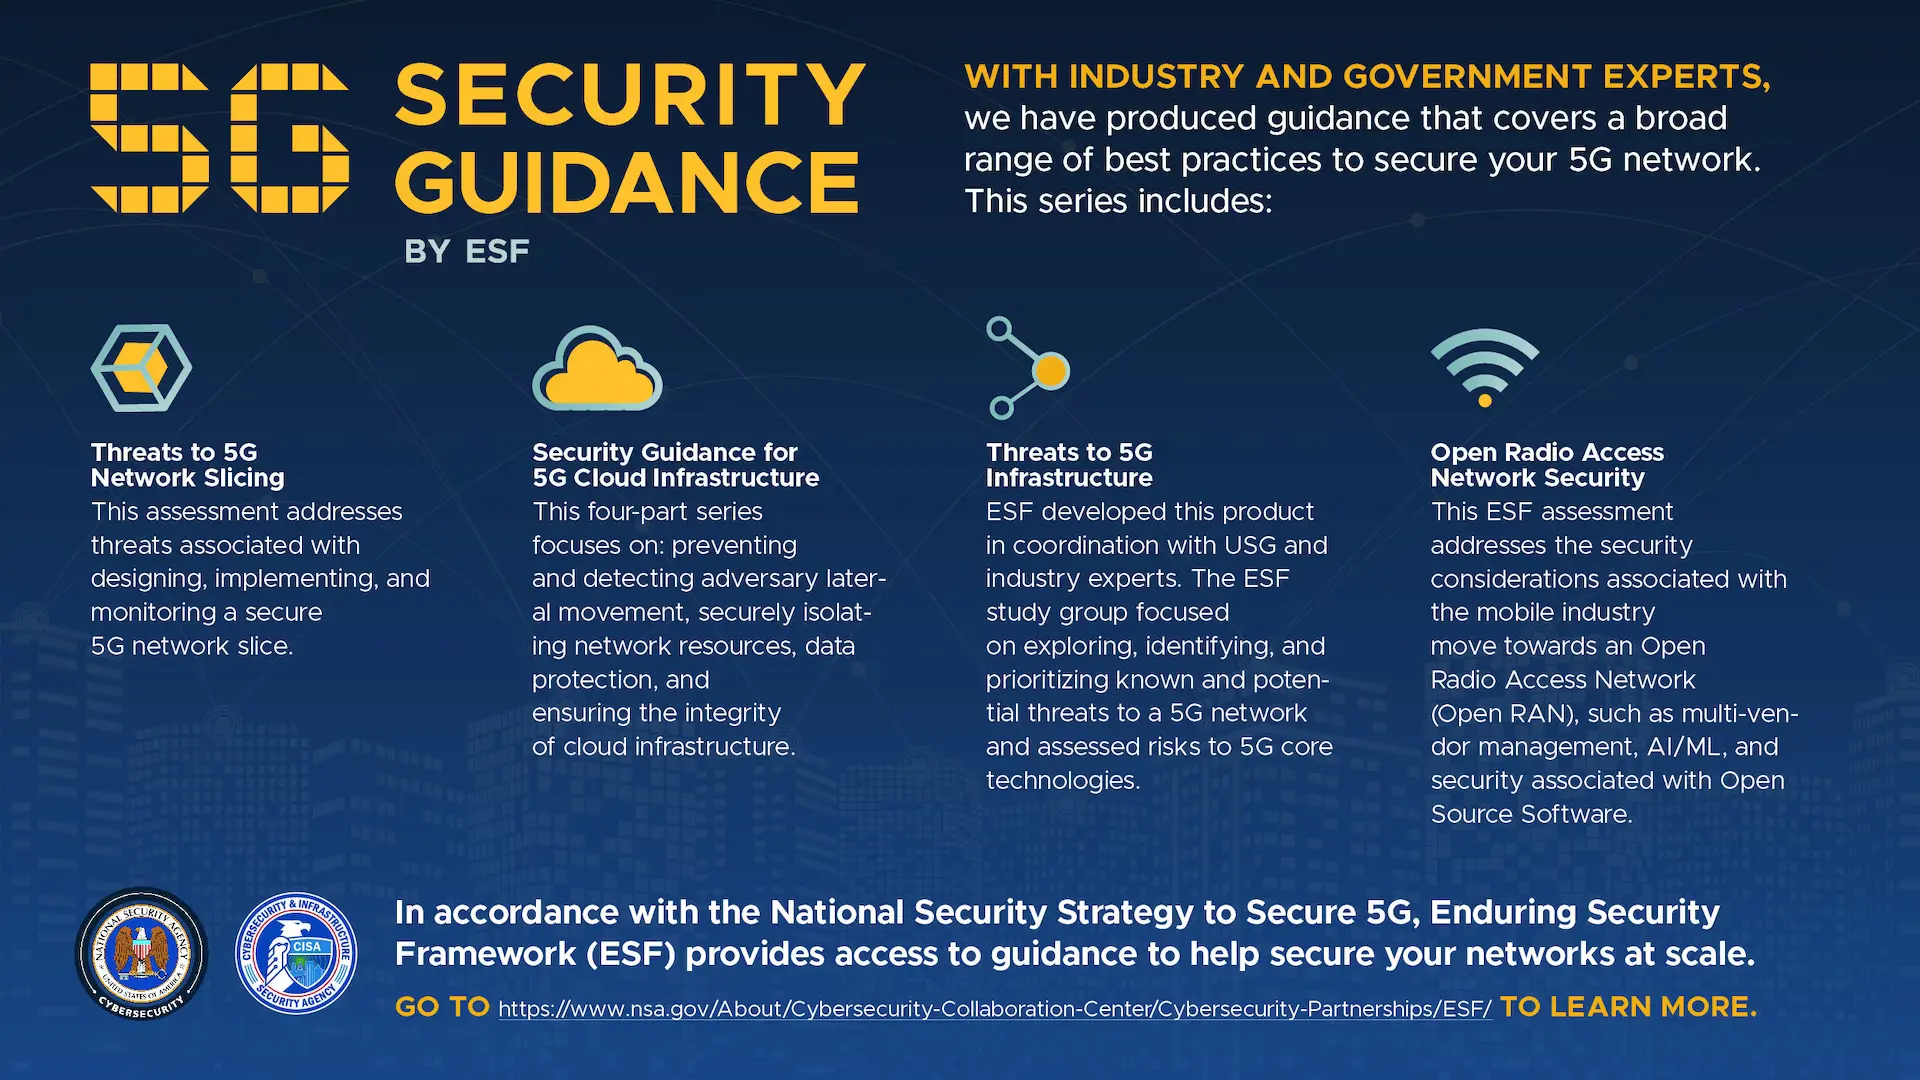 takian.ir cisa and nsa issue new guidance to strengthen 5g network slicing against threats 1